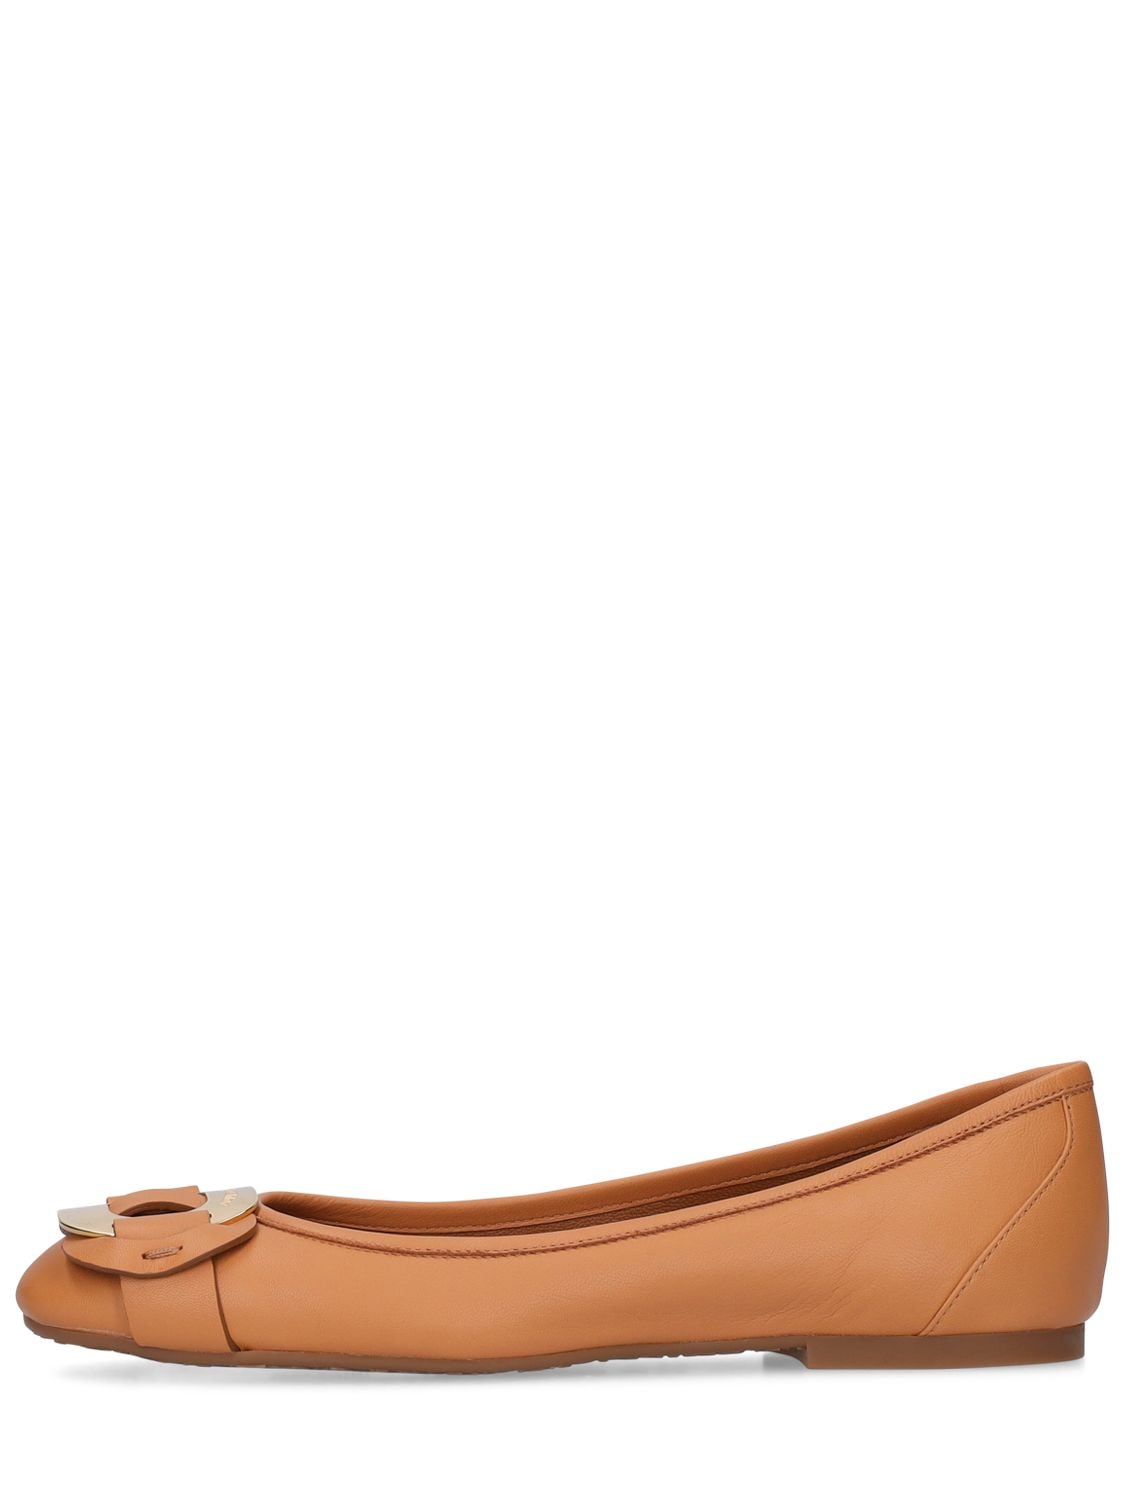 See By Chloé Chany Leather Ballerina Flats In Tan